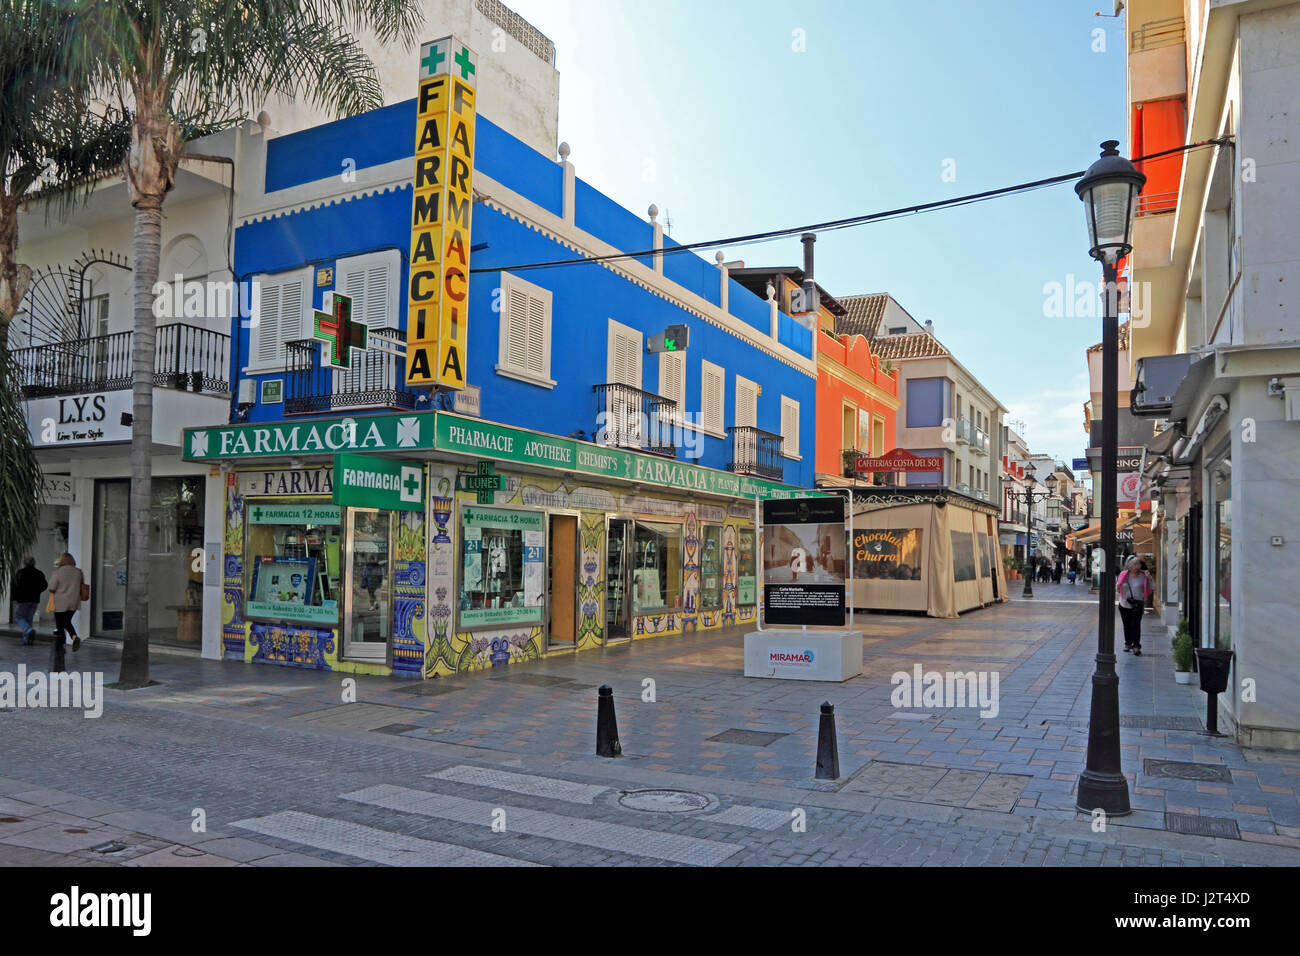 Farmacia Pharmacy) with brightly coloured and tiled exterior, Fuengirola, Spain Stock Photo